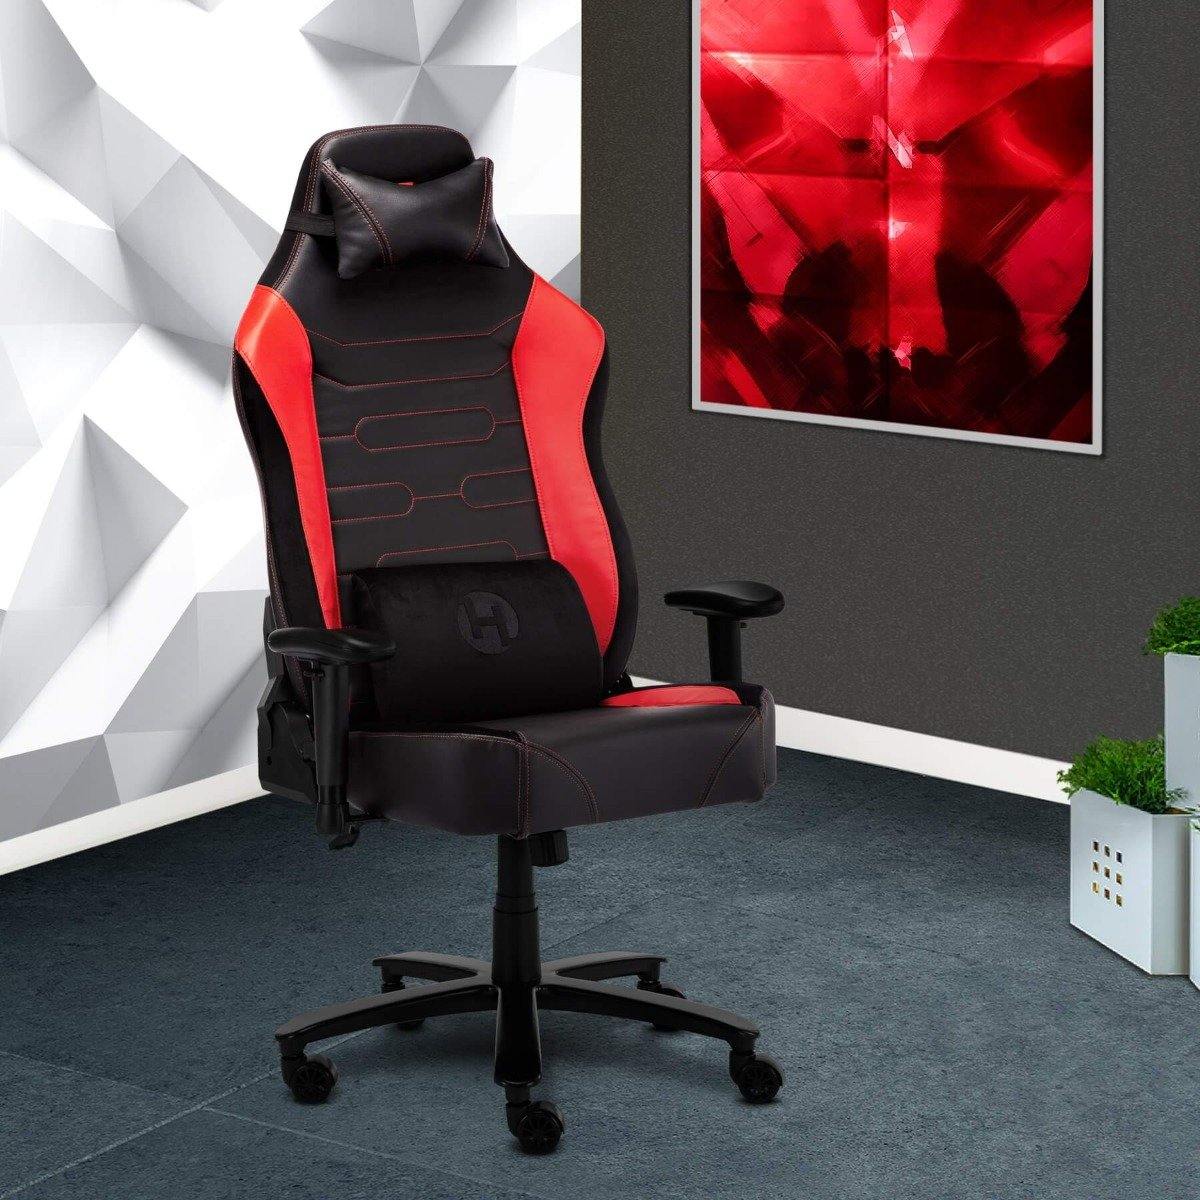 Techni Sport TS-XXL2 Red Office-PC XXL Gaming Chair RTA-TSXXL2-RED in Office